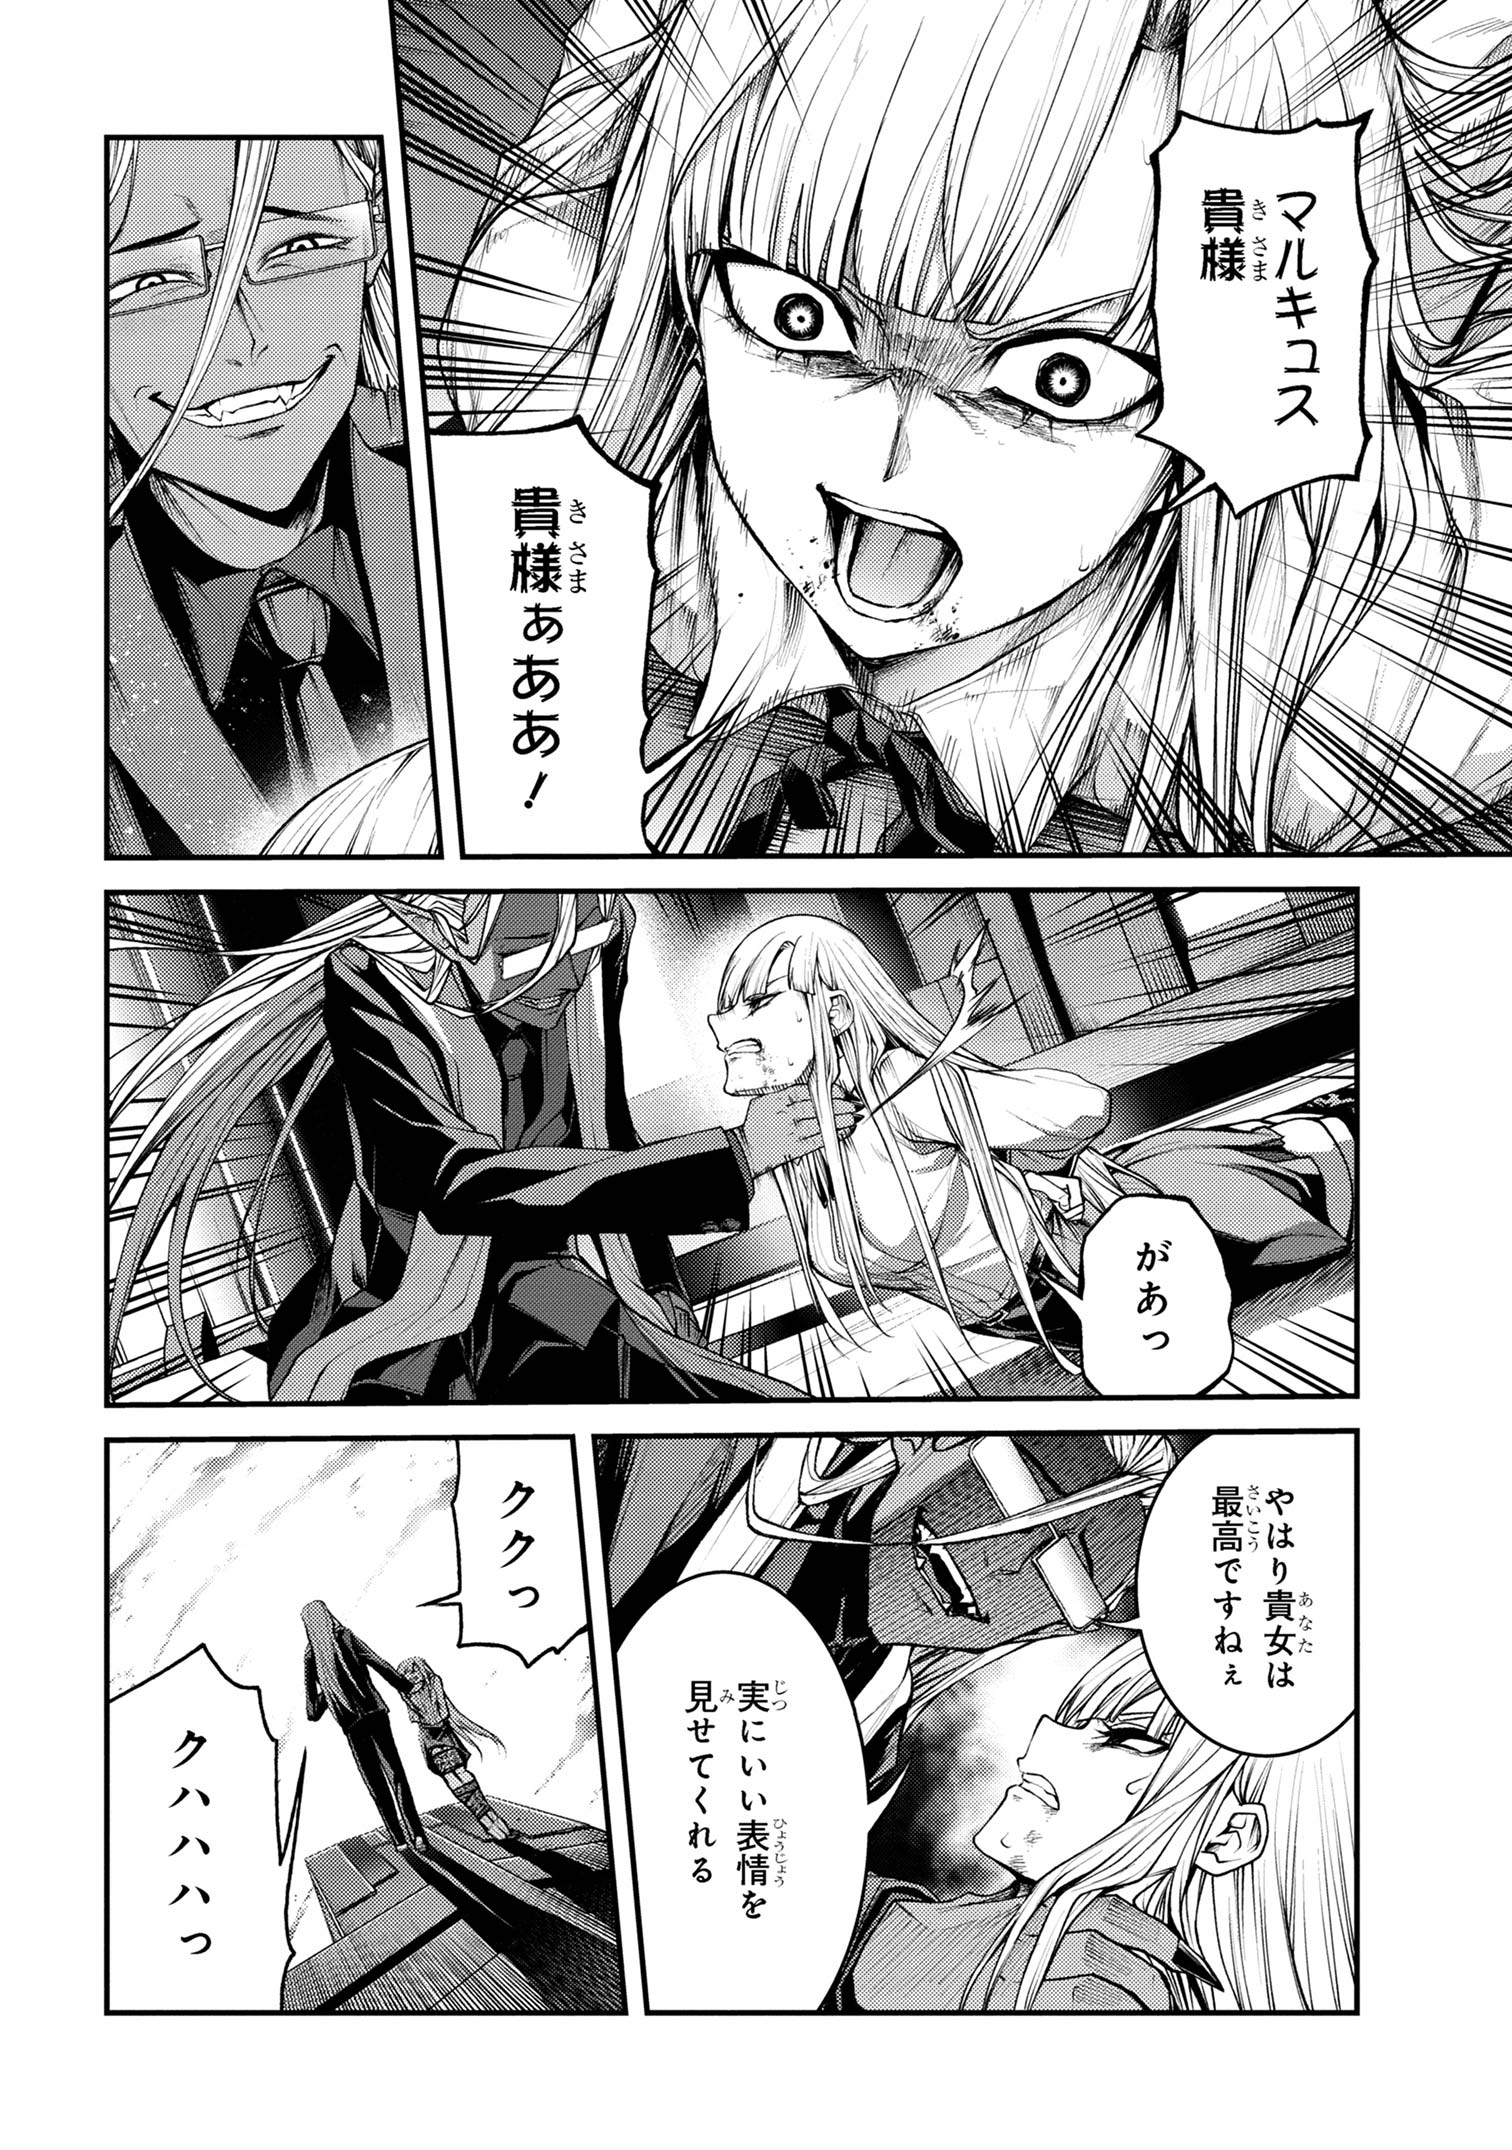 Maou 2099 - Chapter 10.1 - Page 14